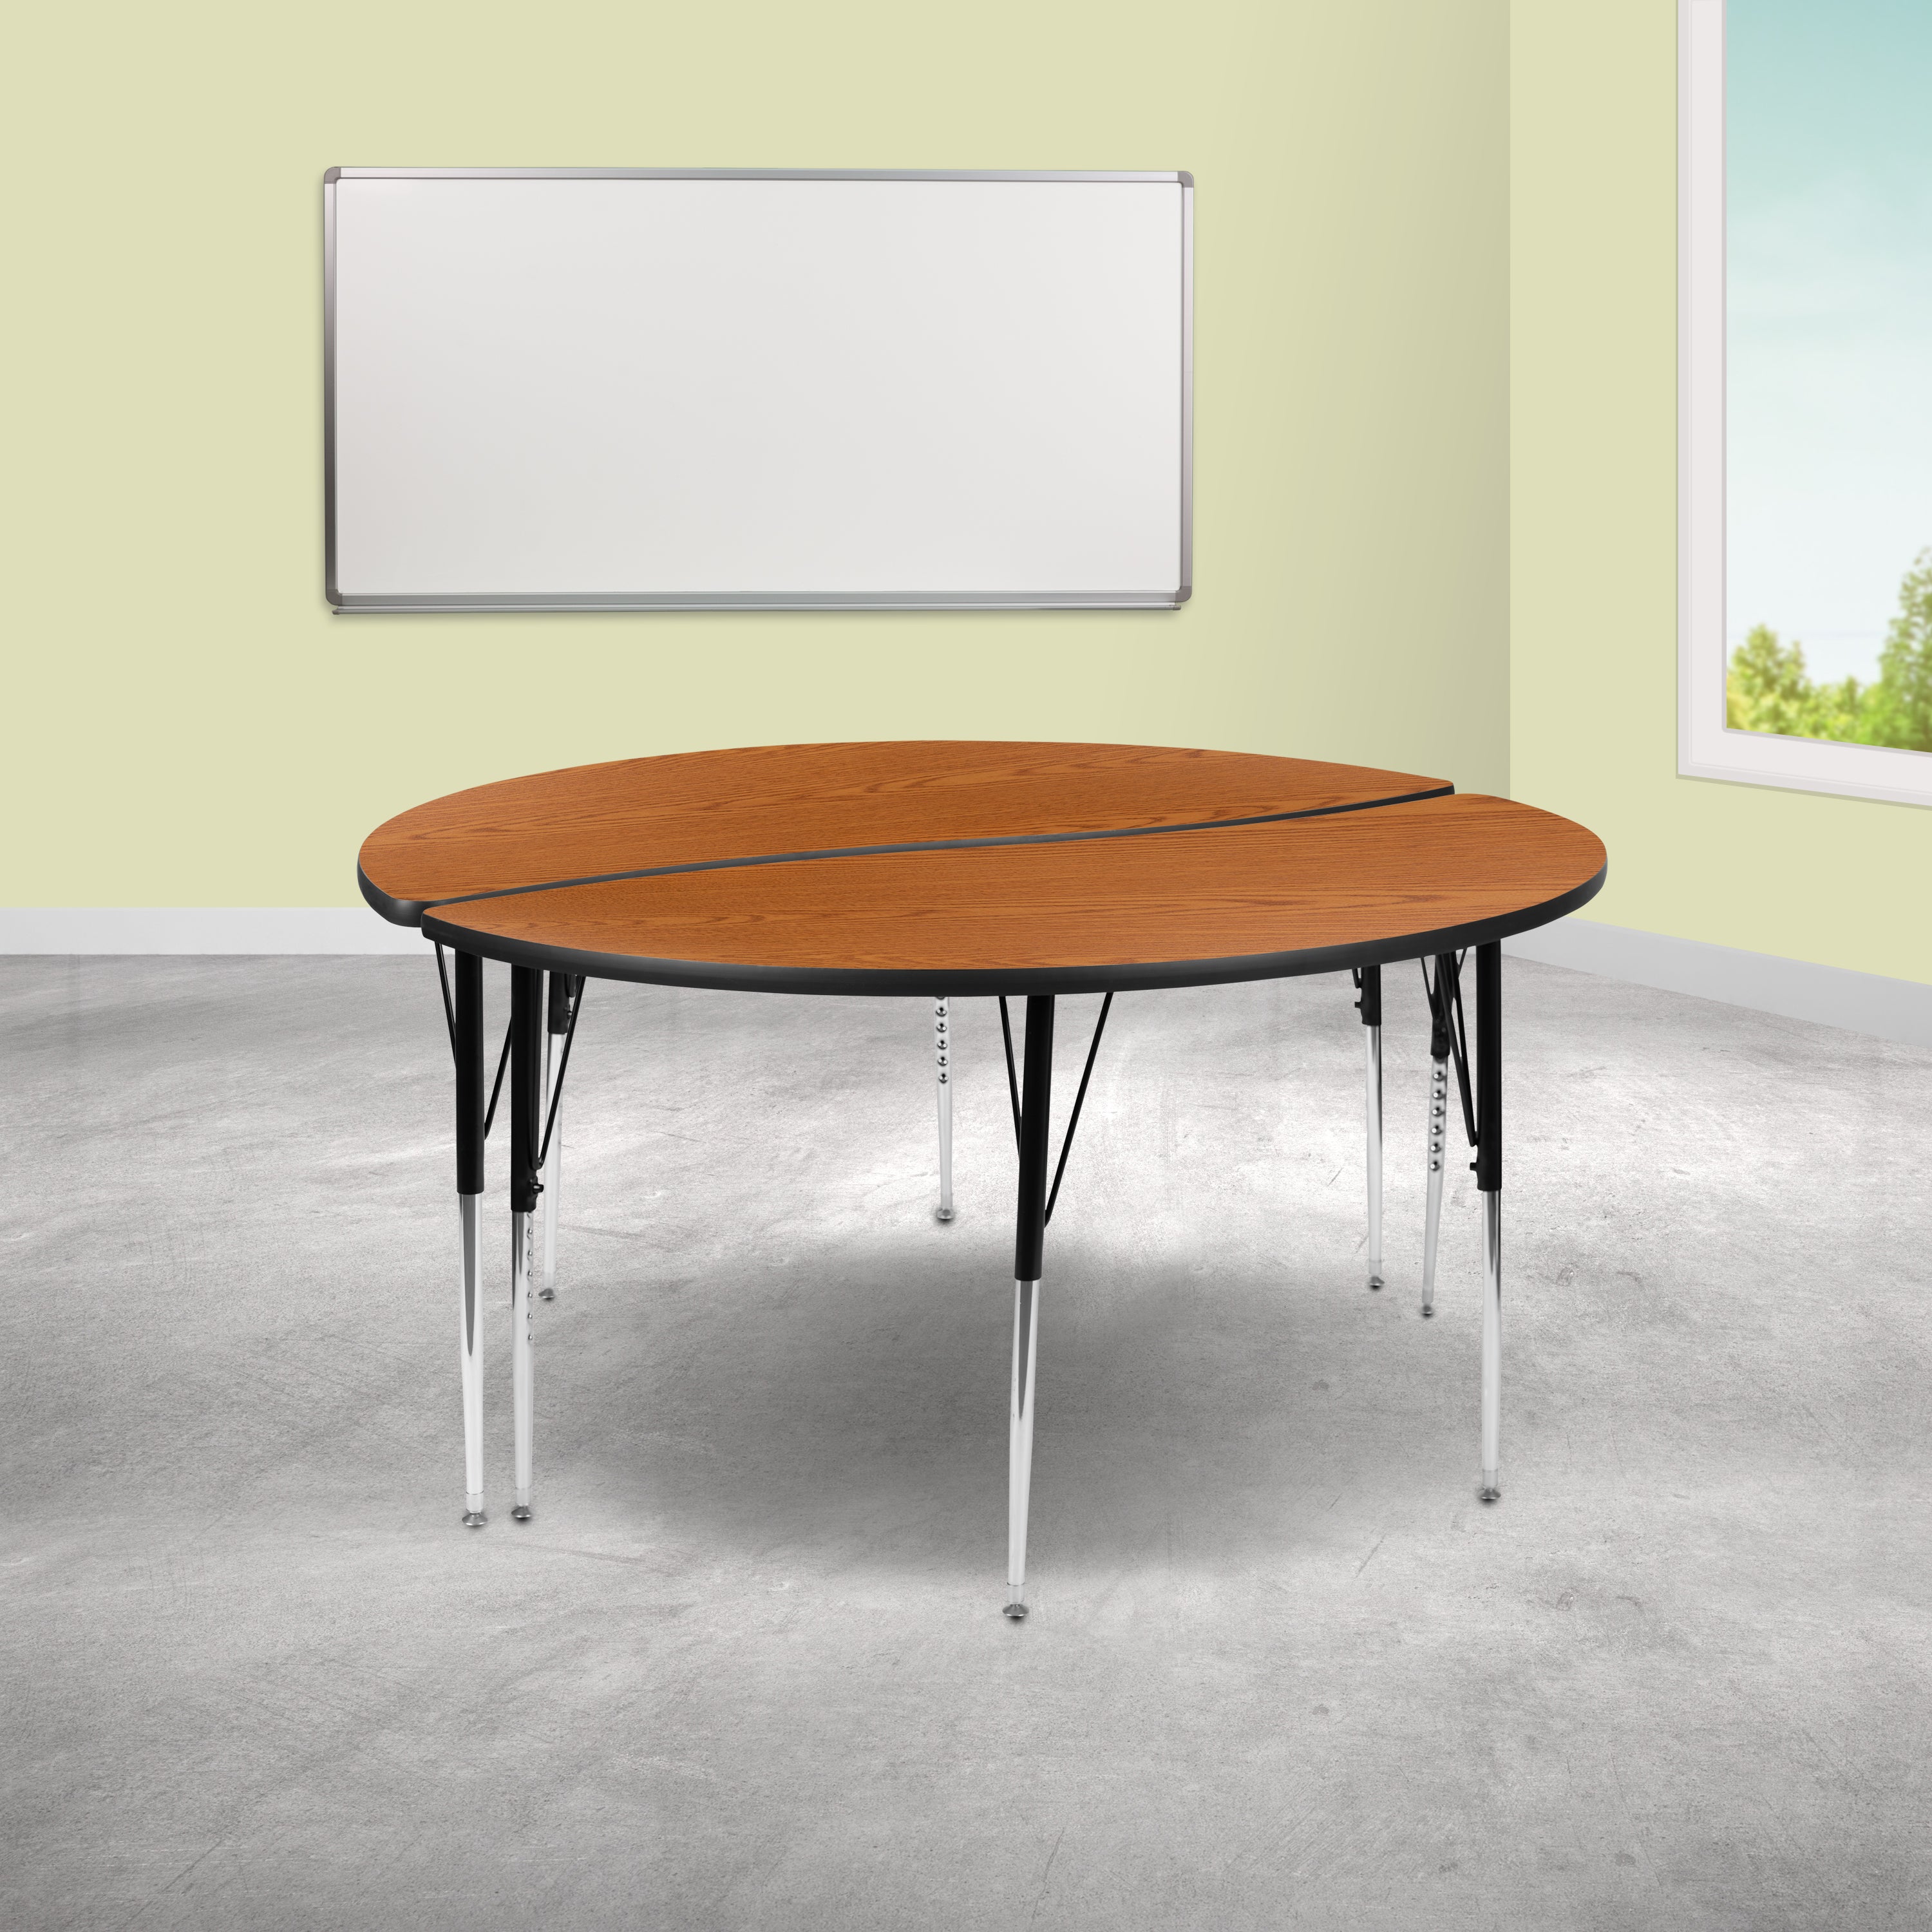 2 Piece 60" Circle Wave Flexible Grey Thermal Laminate Activity Table Set - Standard Height Adjustable Legs-Collaborative Activity Table Set-Flash Furniture-Wall2Wall Furnishings